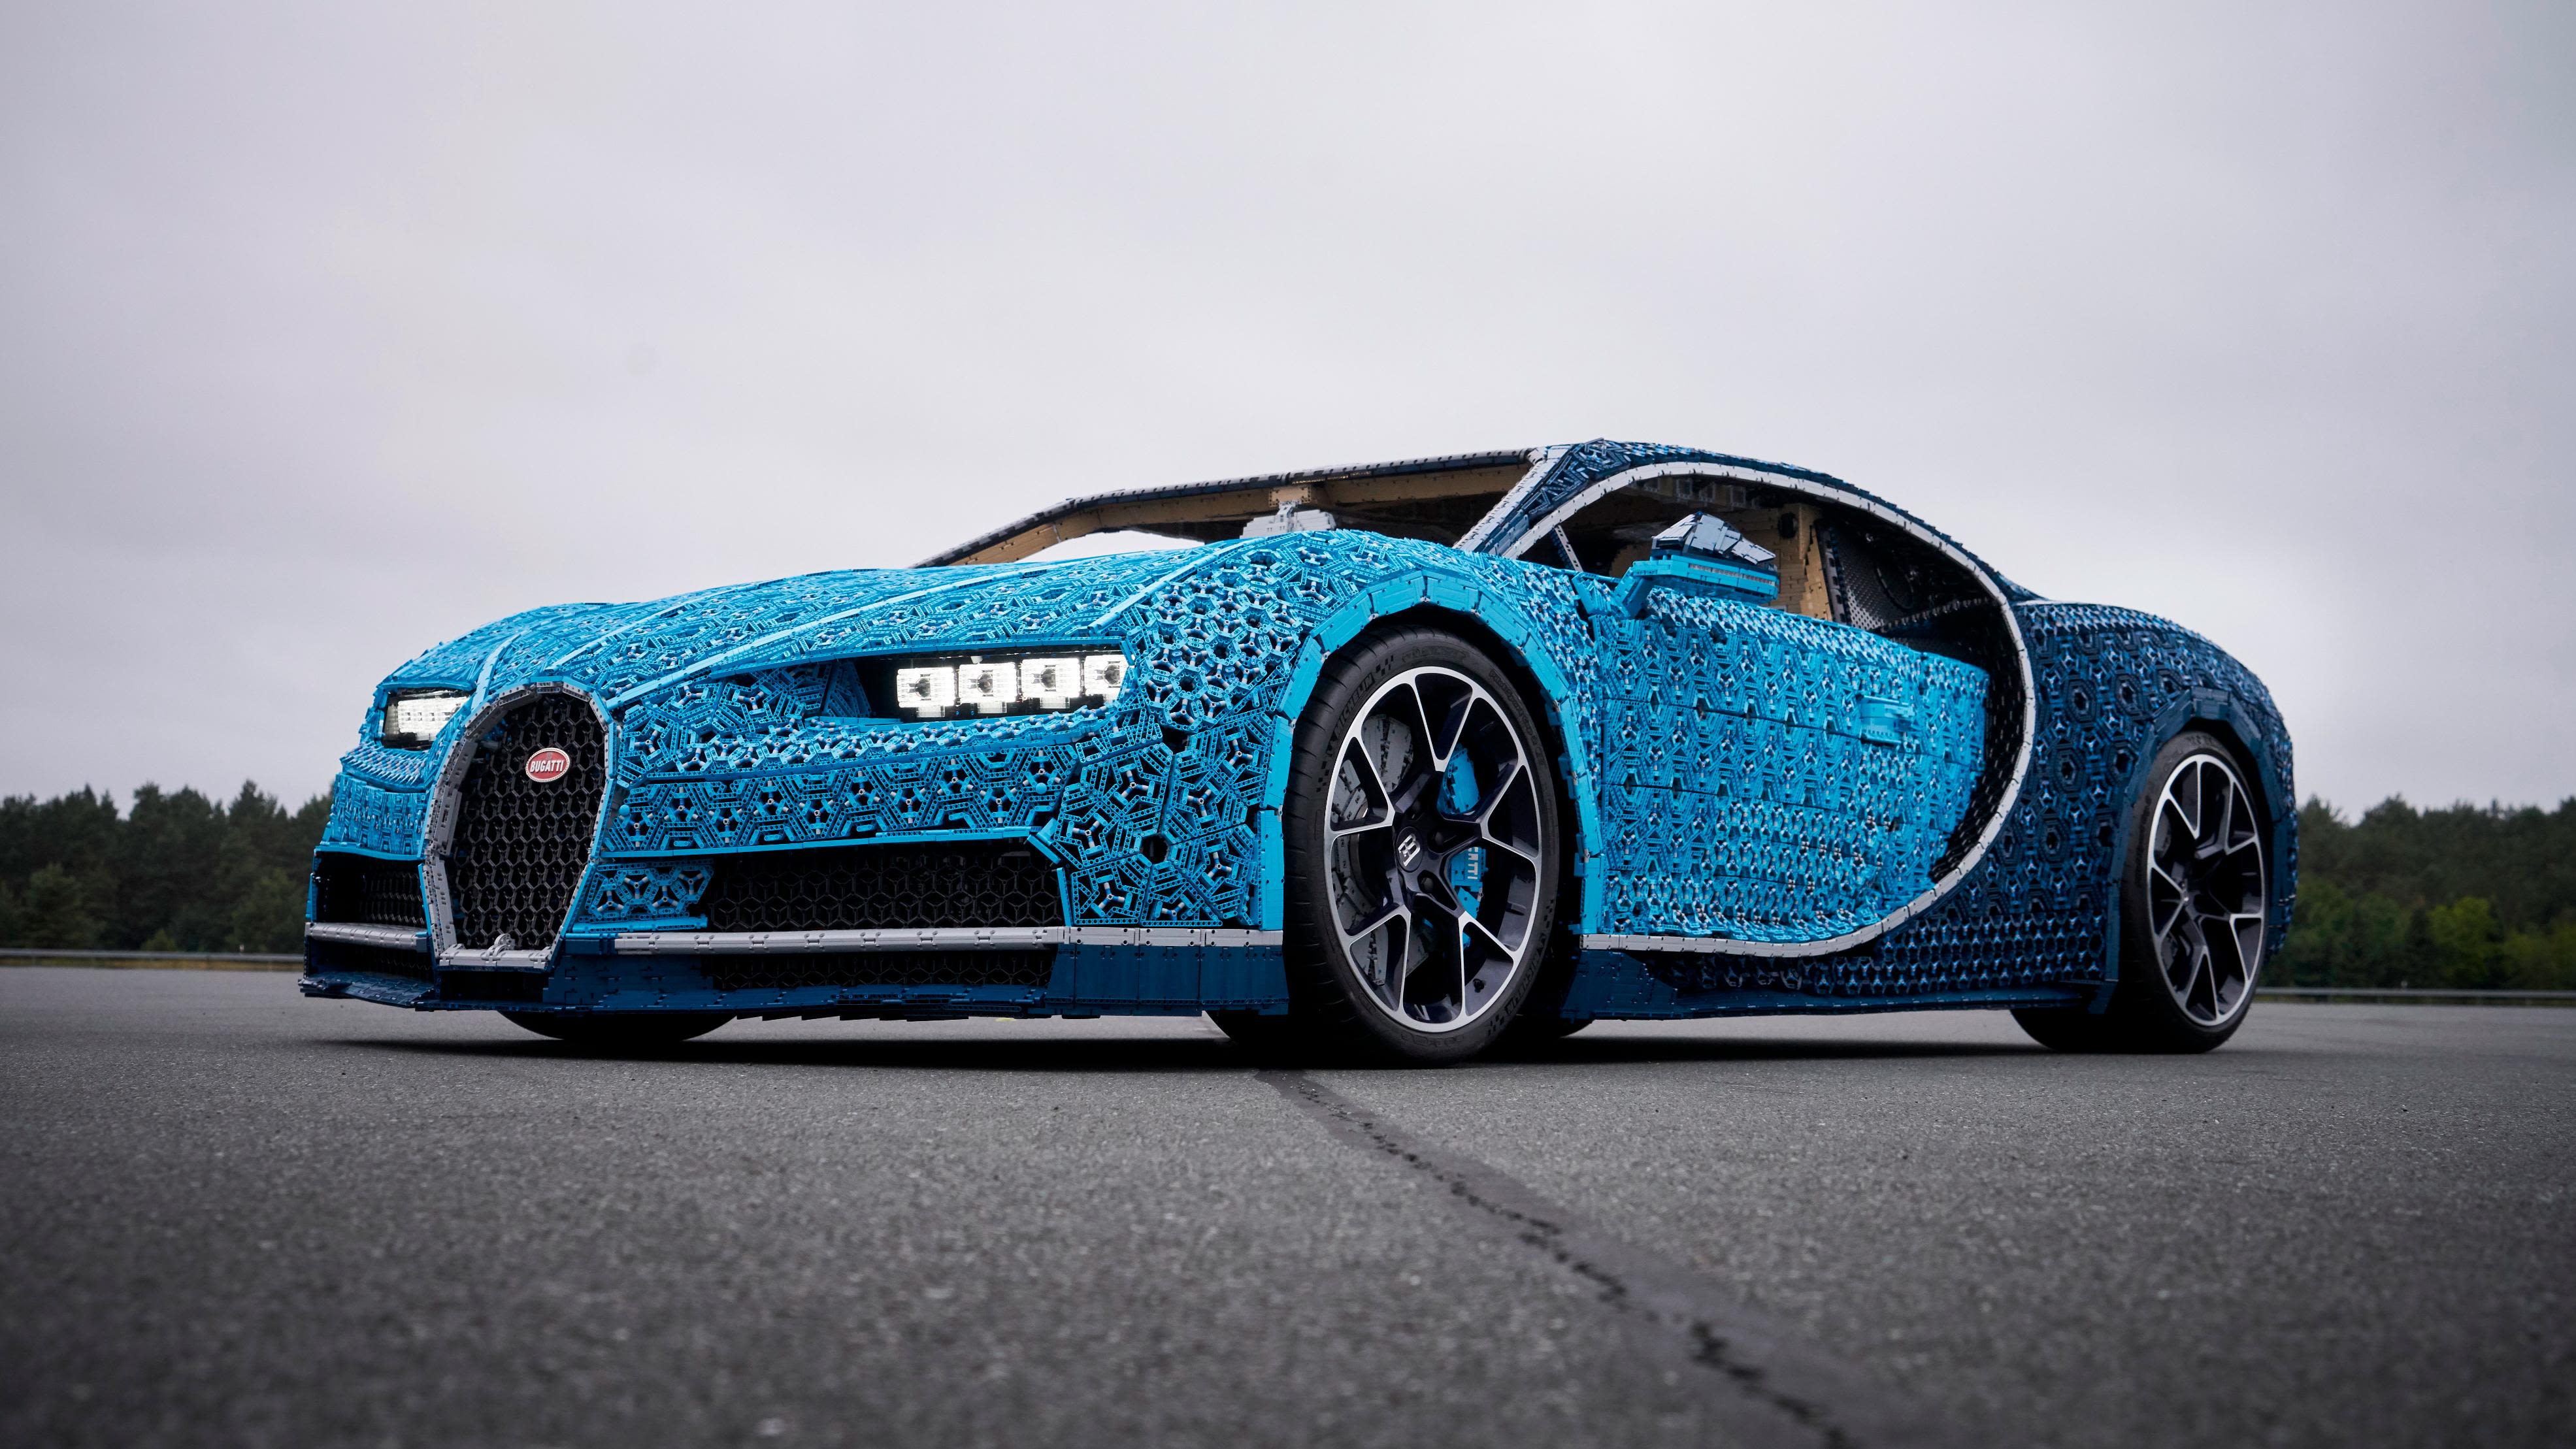 This drivable Bugatti is made out of 1 million Legos | CNN